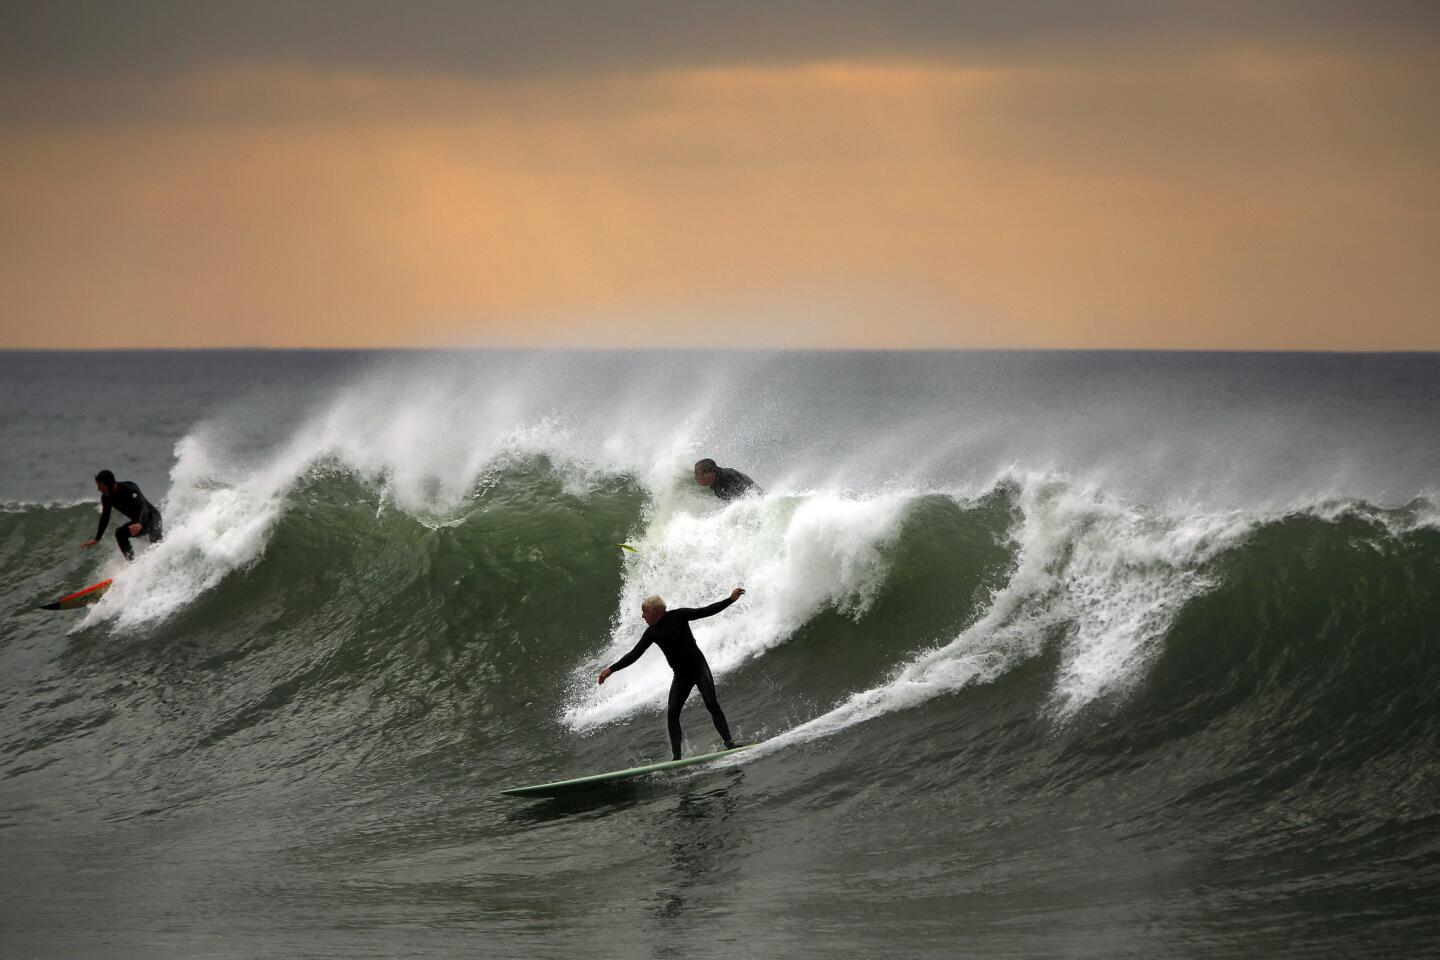 Tom Muneio, 61, of Santa Barbara, center, enjoys a wave in Ventura County, where sets of 8 to 10 feet pounded the coast ahead of rain storms expected late Thursday afternoon.